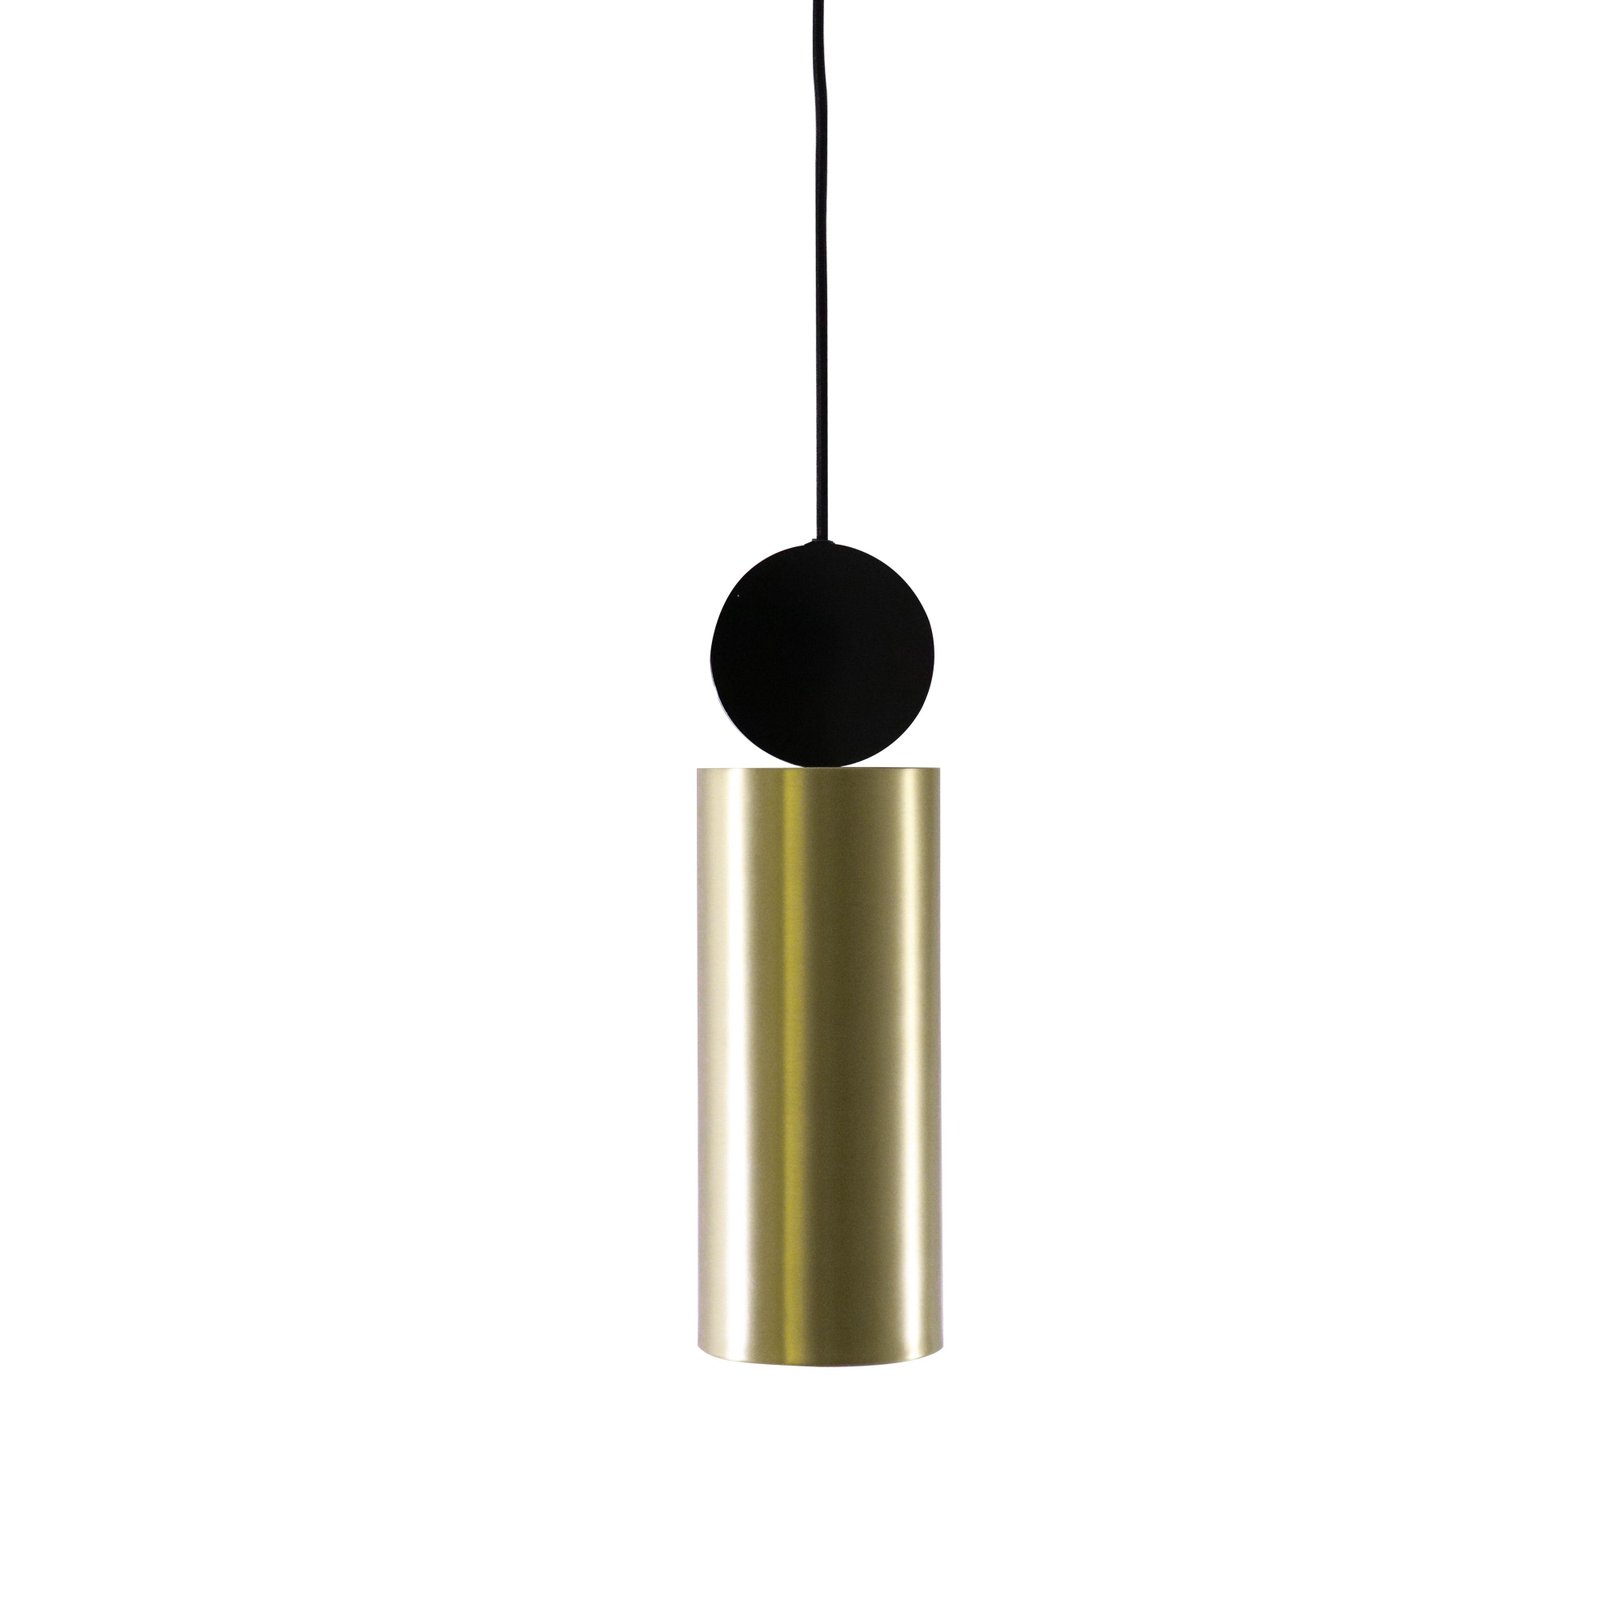 Cale Pendant Collection in Gold, Cool White, Dimensions: Diameter 9" x Height 11" (or 16cm x 31cm)